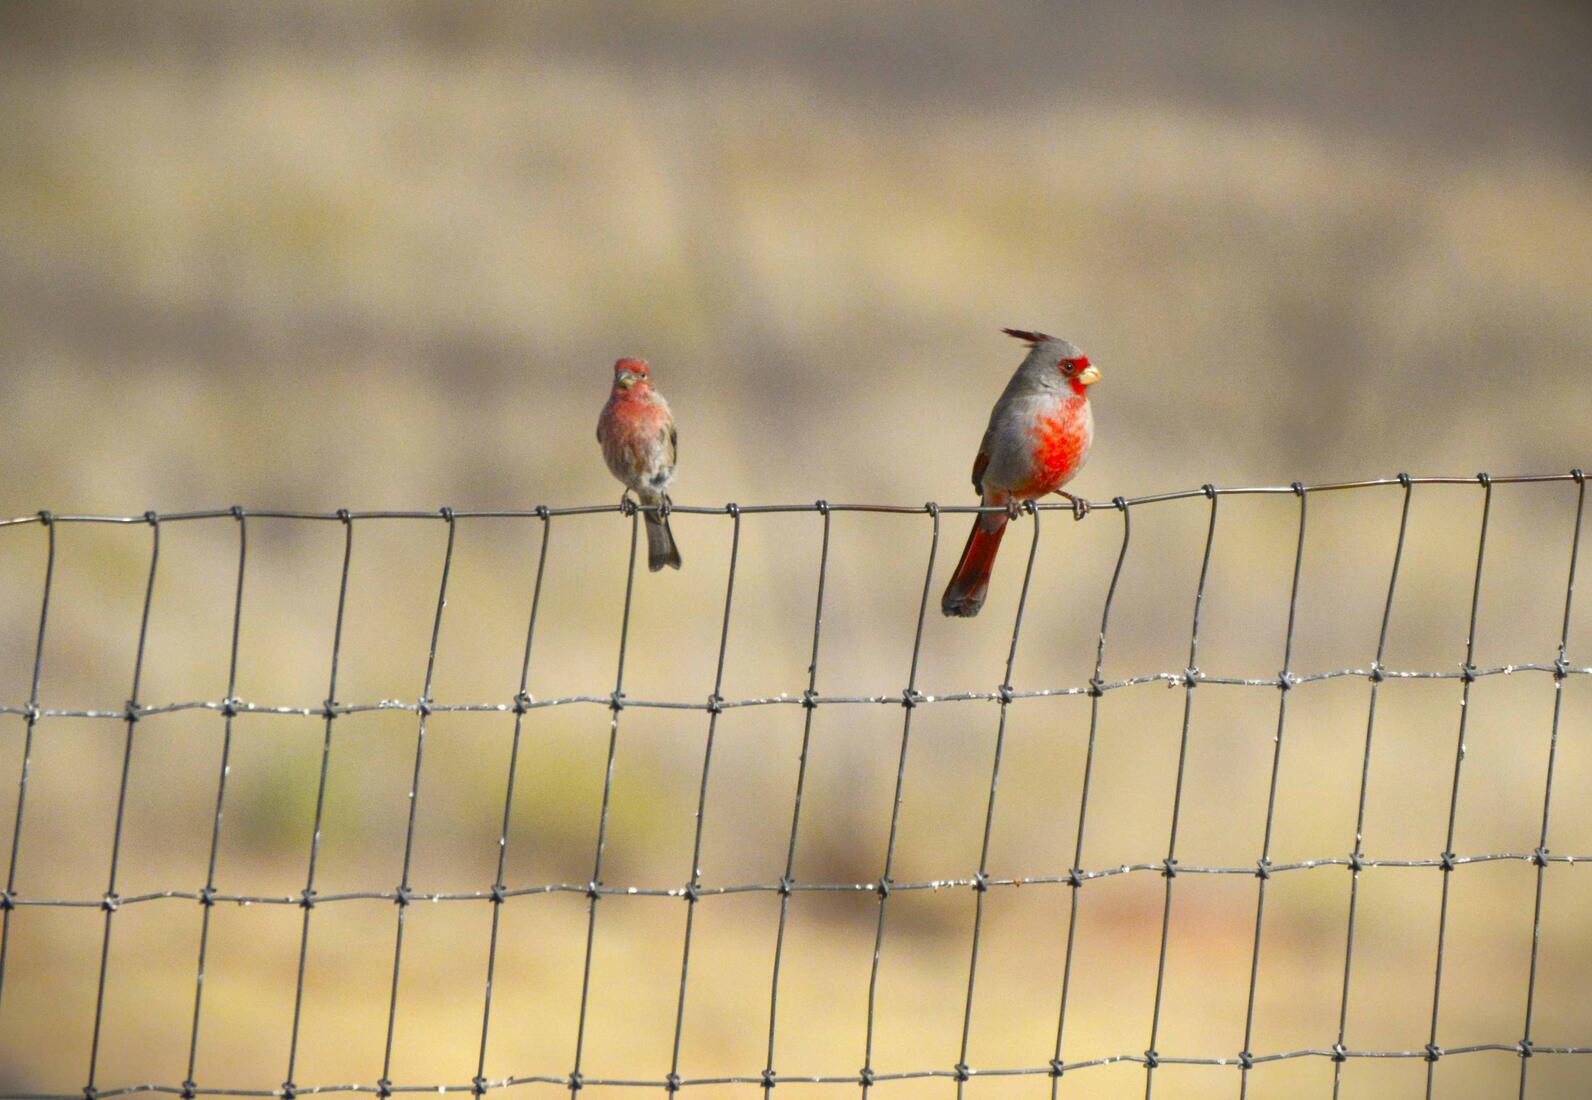 Two birds sporting bright red, a male House Finch and Pyrrhuloxia, perch side by side on a wire fence.